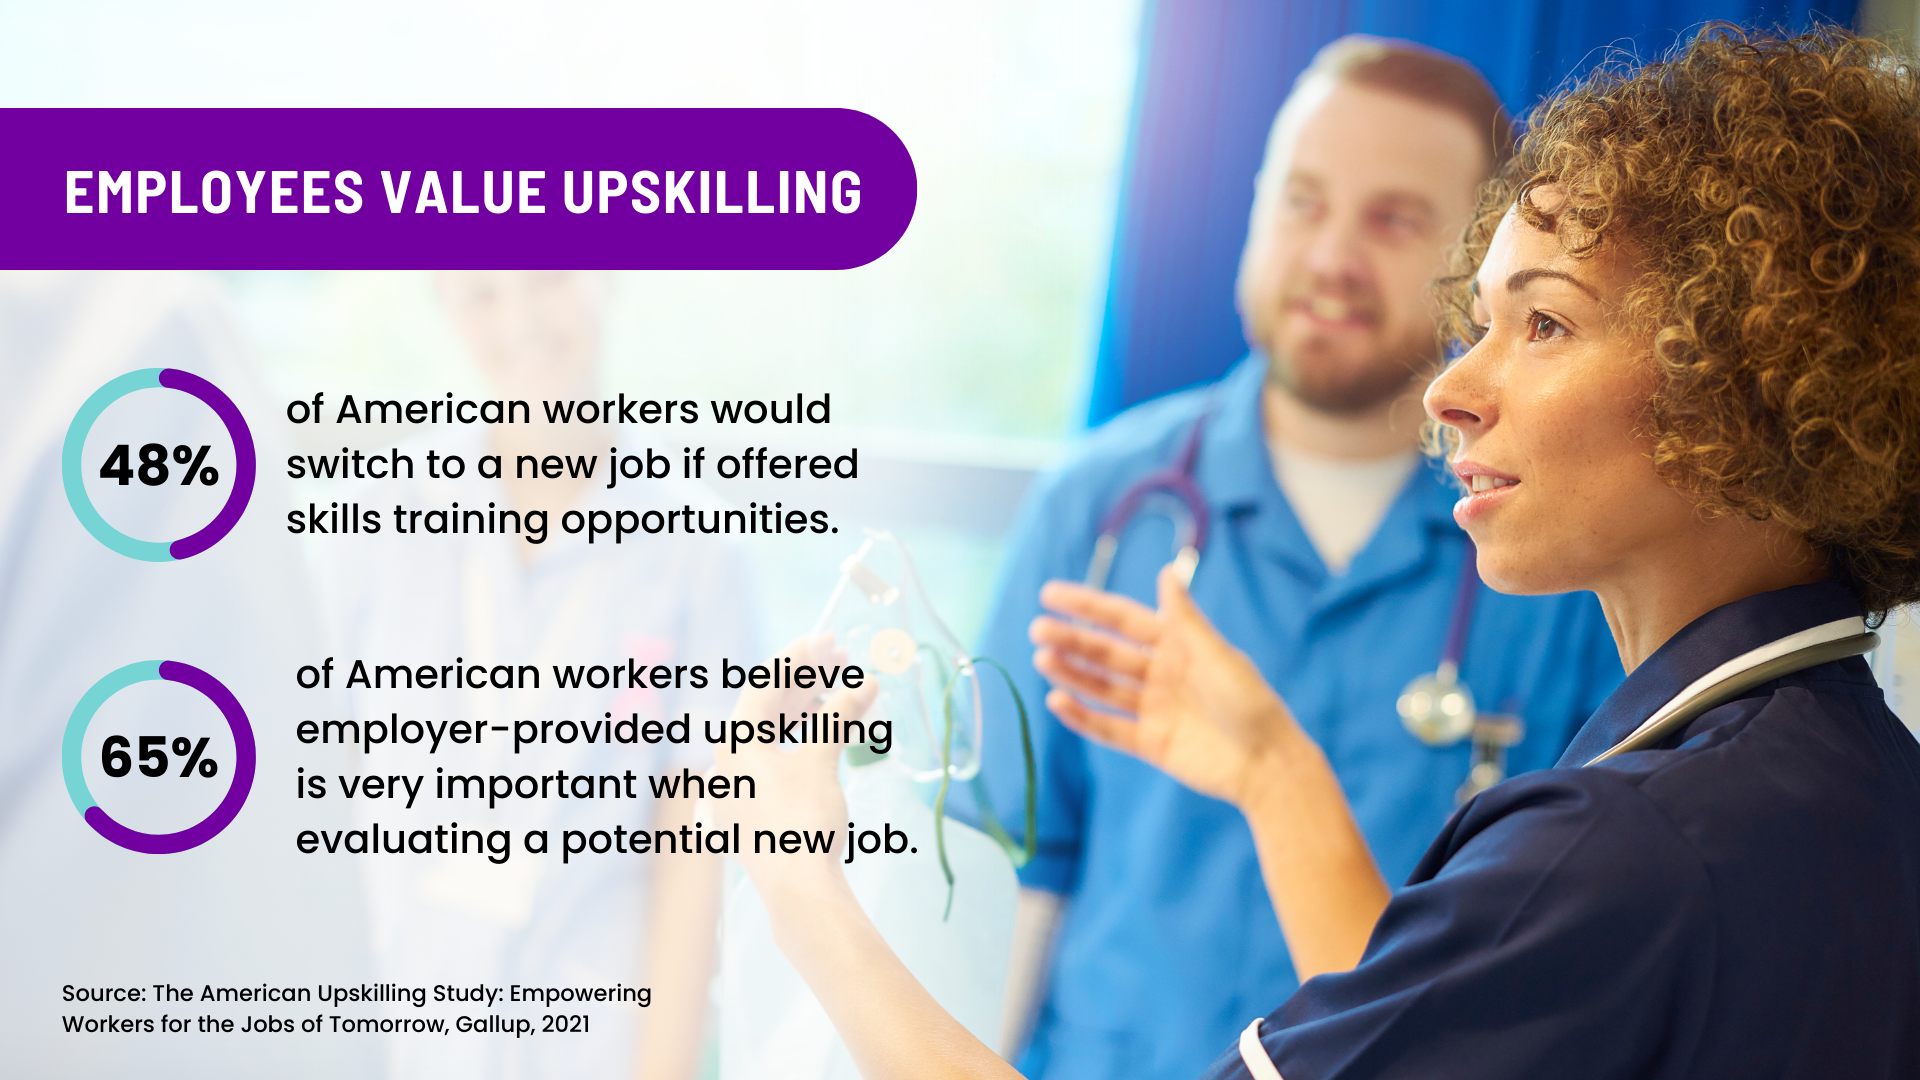 An experienced nurse is training new nurses in a hospital room. Text overlay says that 48% of American workers would switch to a new job if offered skills training opportunities, and 65% of American workers believe employer-provided upskilling is very important when evaluating a potential new job. 